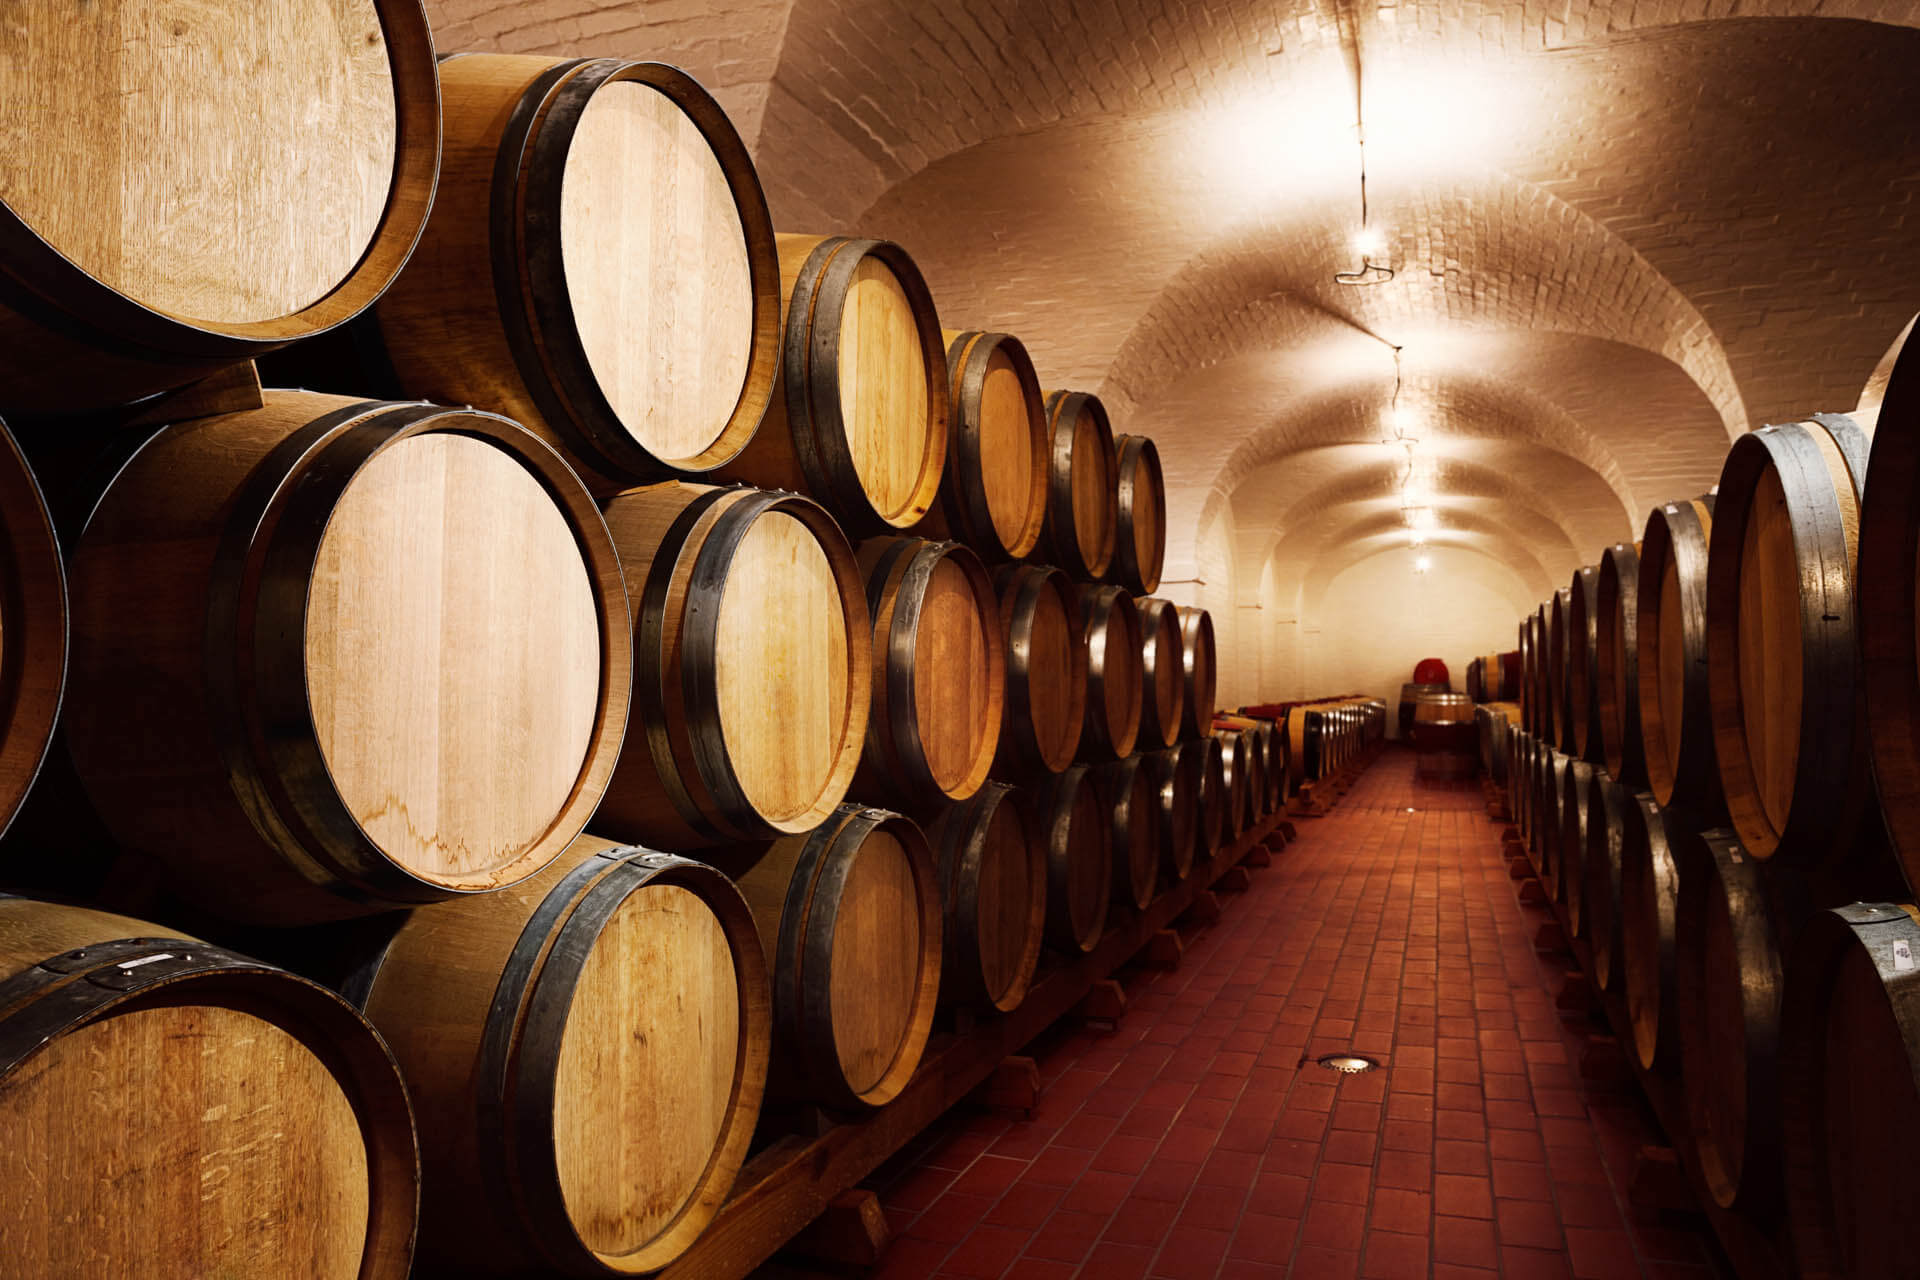 Wooden wine or whisky barrels in cellar